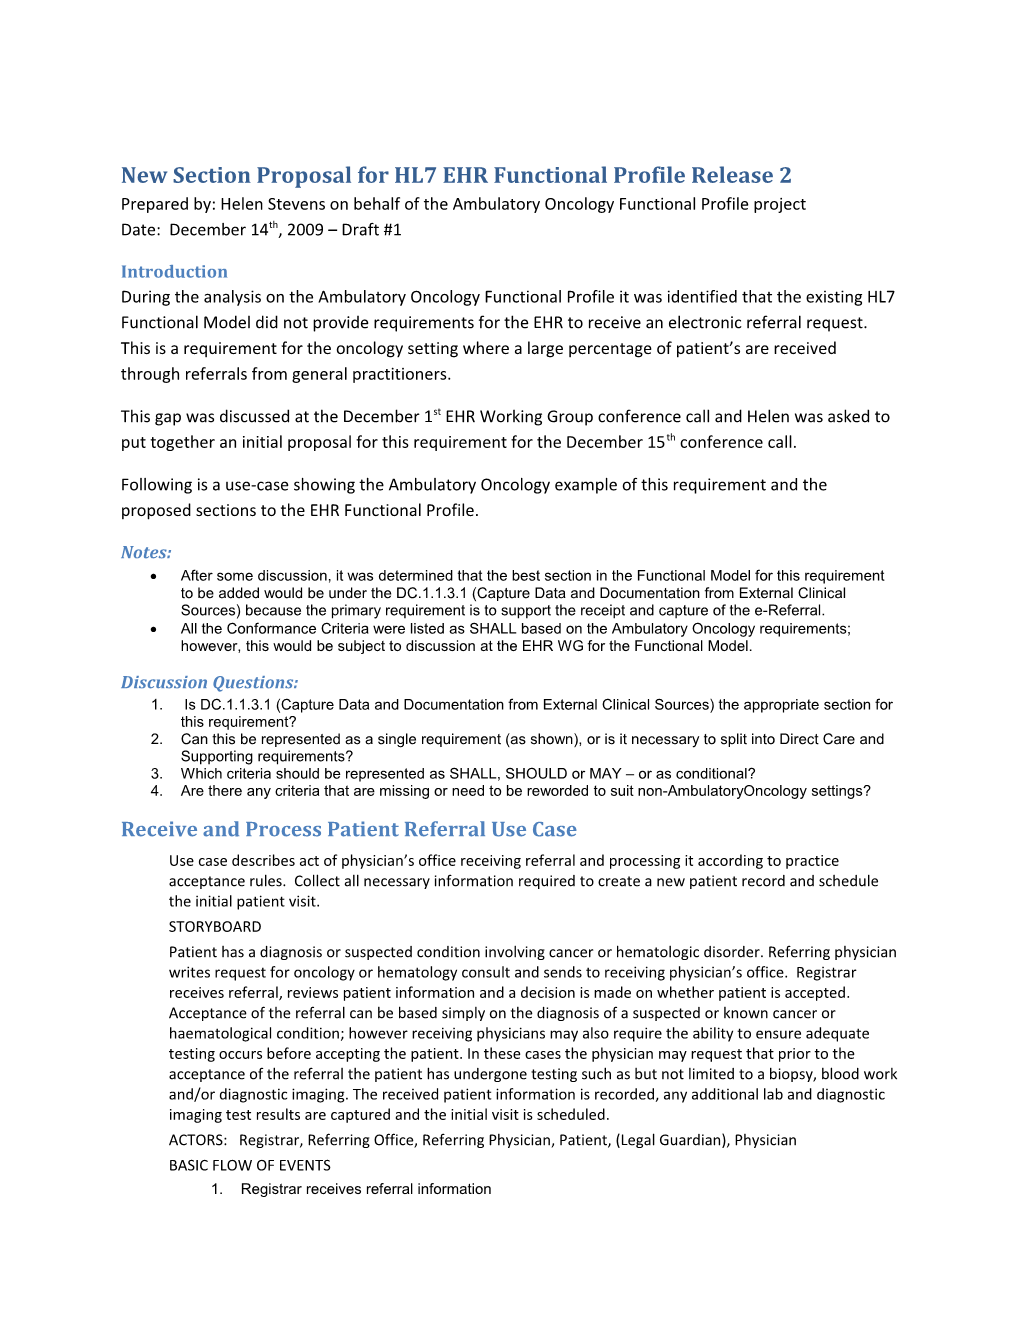 New Section Proposal for HL7 EHR Functional Profile Release 2